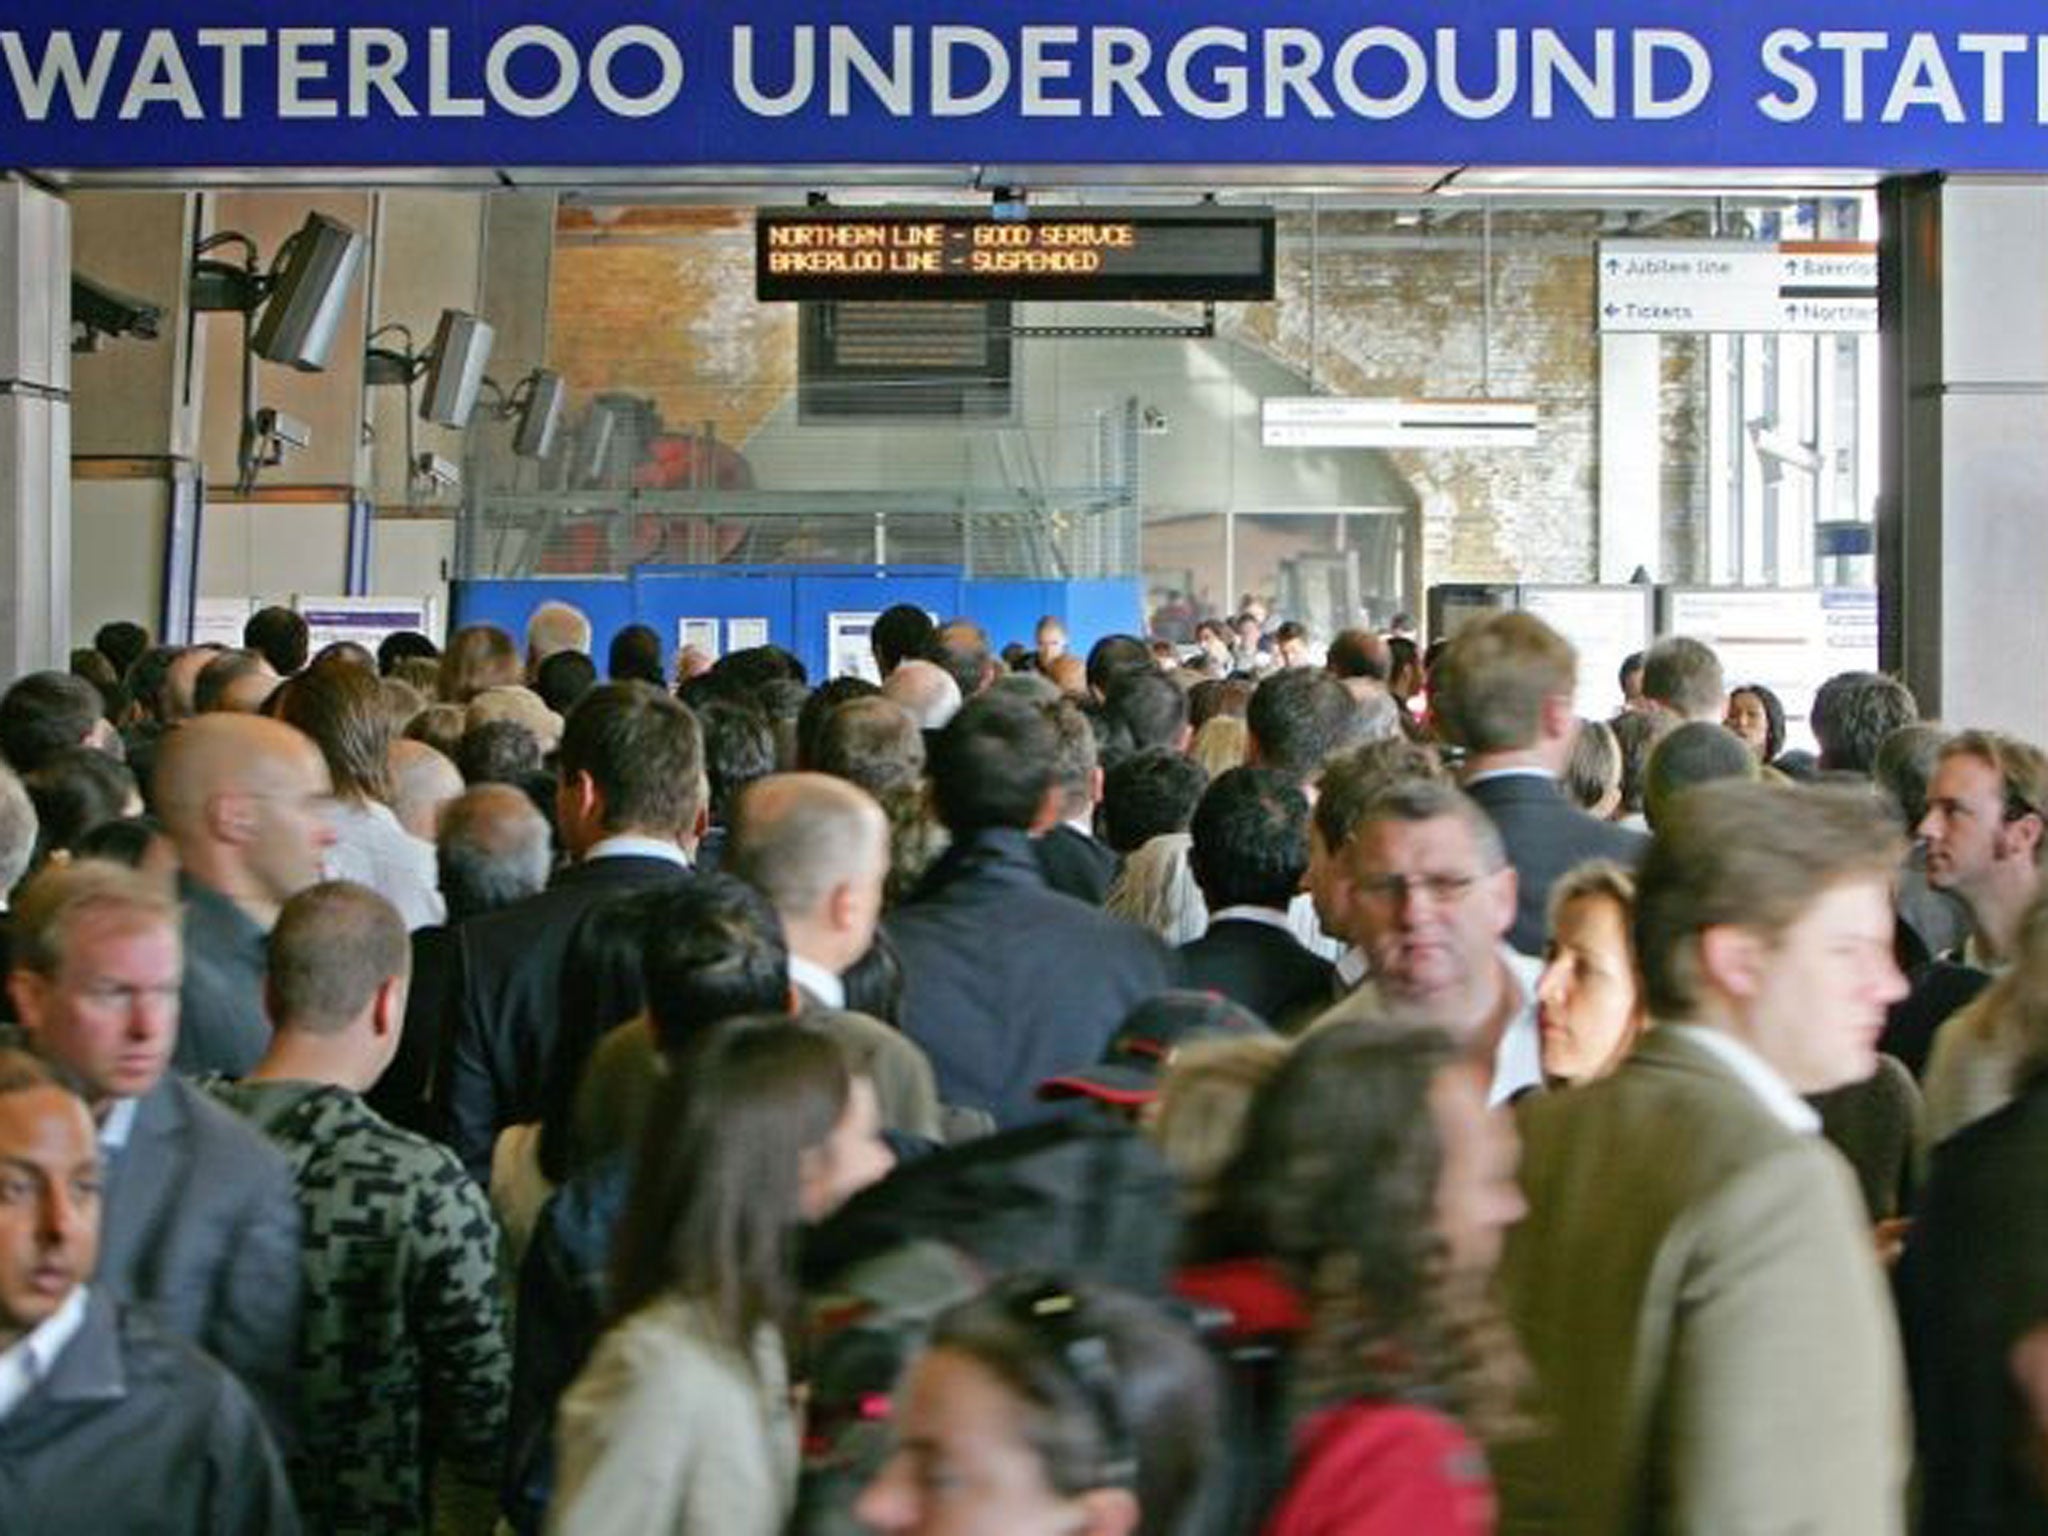 In this file picture taken on September 4, 2007 passengers jostle to enter the Underground station at Waterloo Station in central London, as commuters battled with severe transport disruption to get to work as unions staged a second day of strikes on the